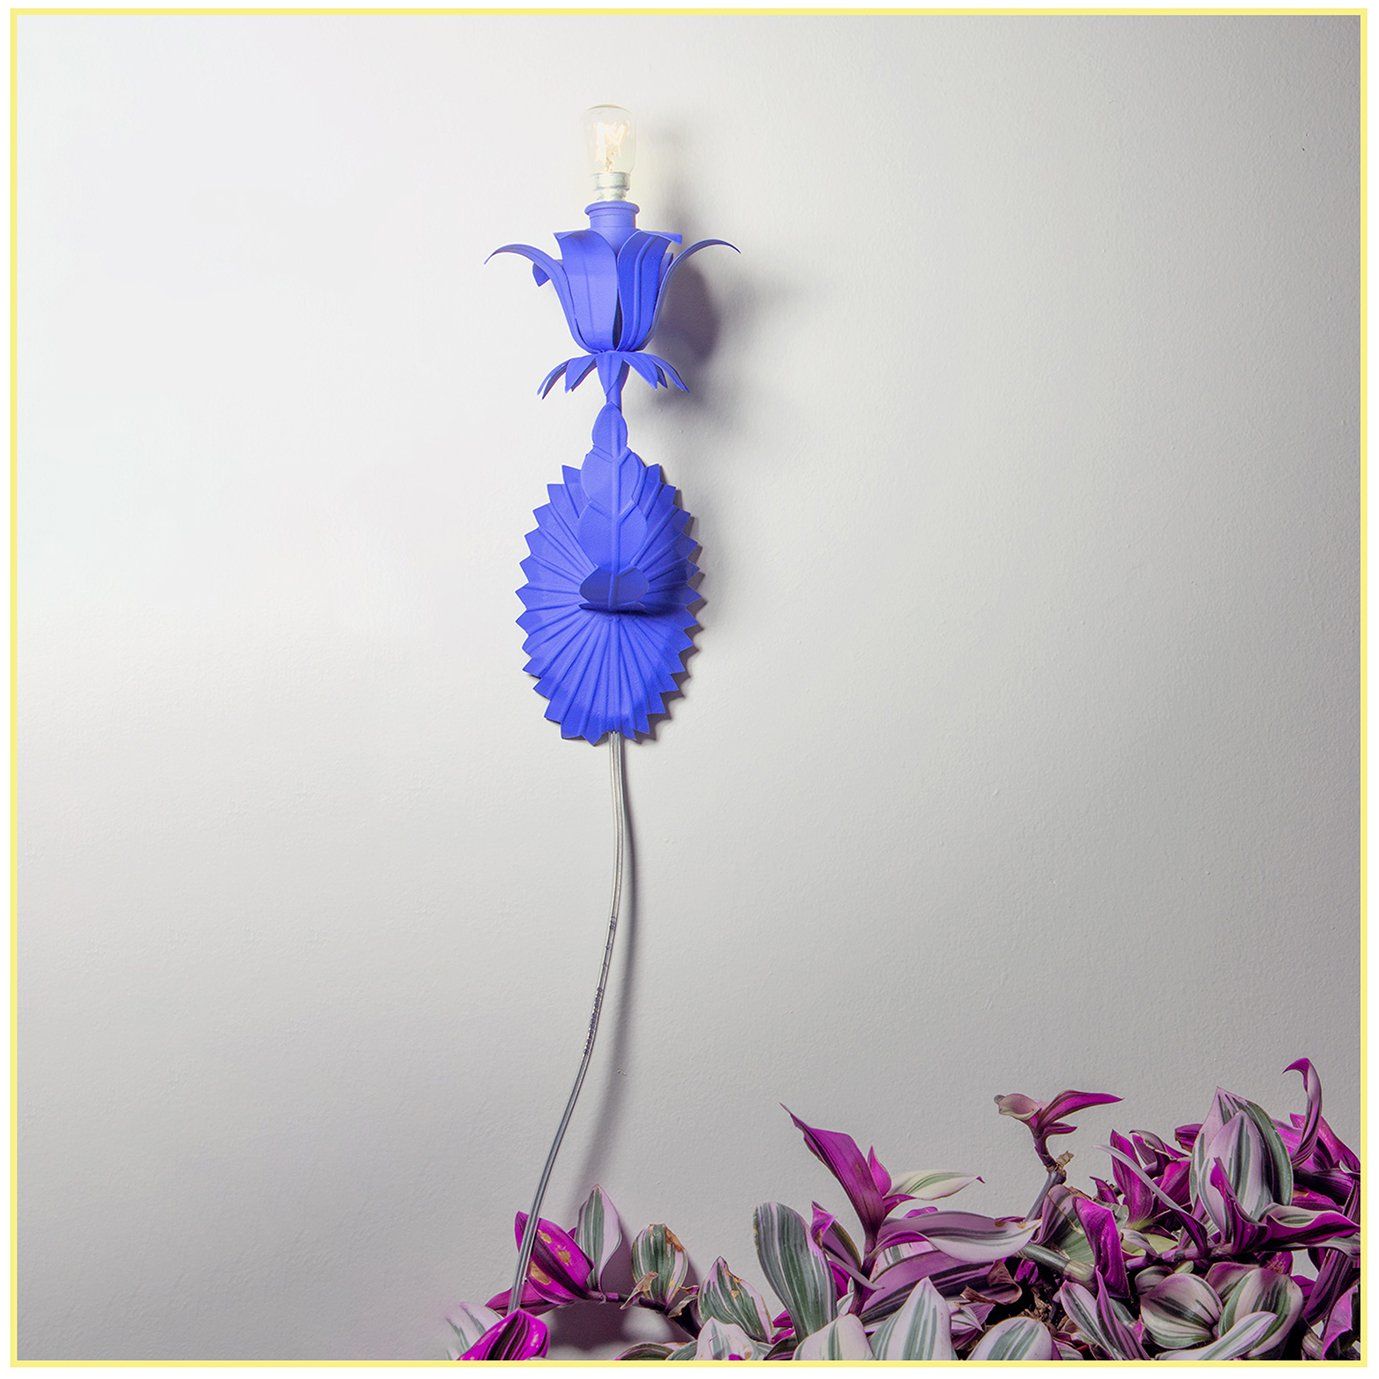  POWER SUIT, VINTAGE WALL LAMP, FLOWER, STRONG BLUE